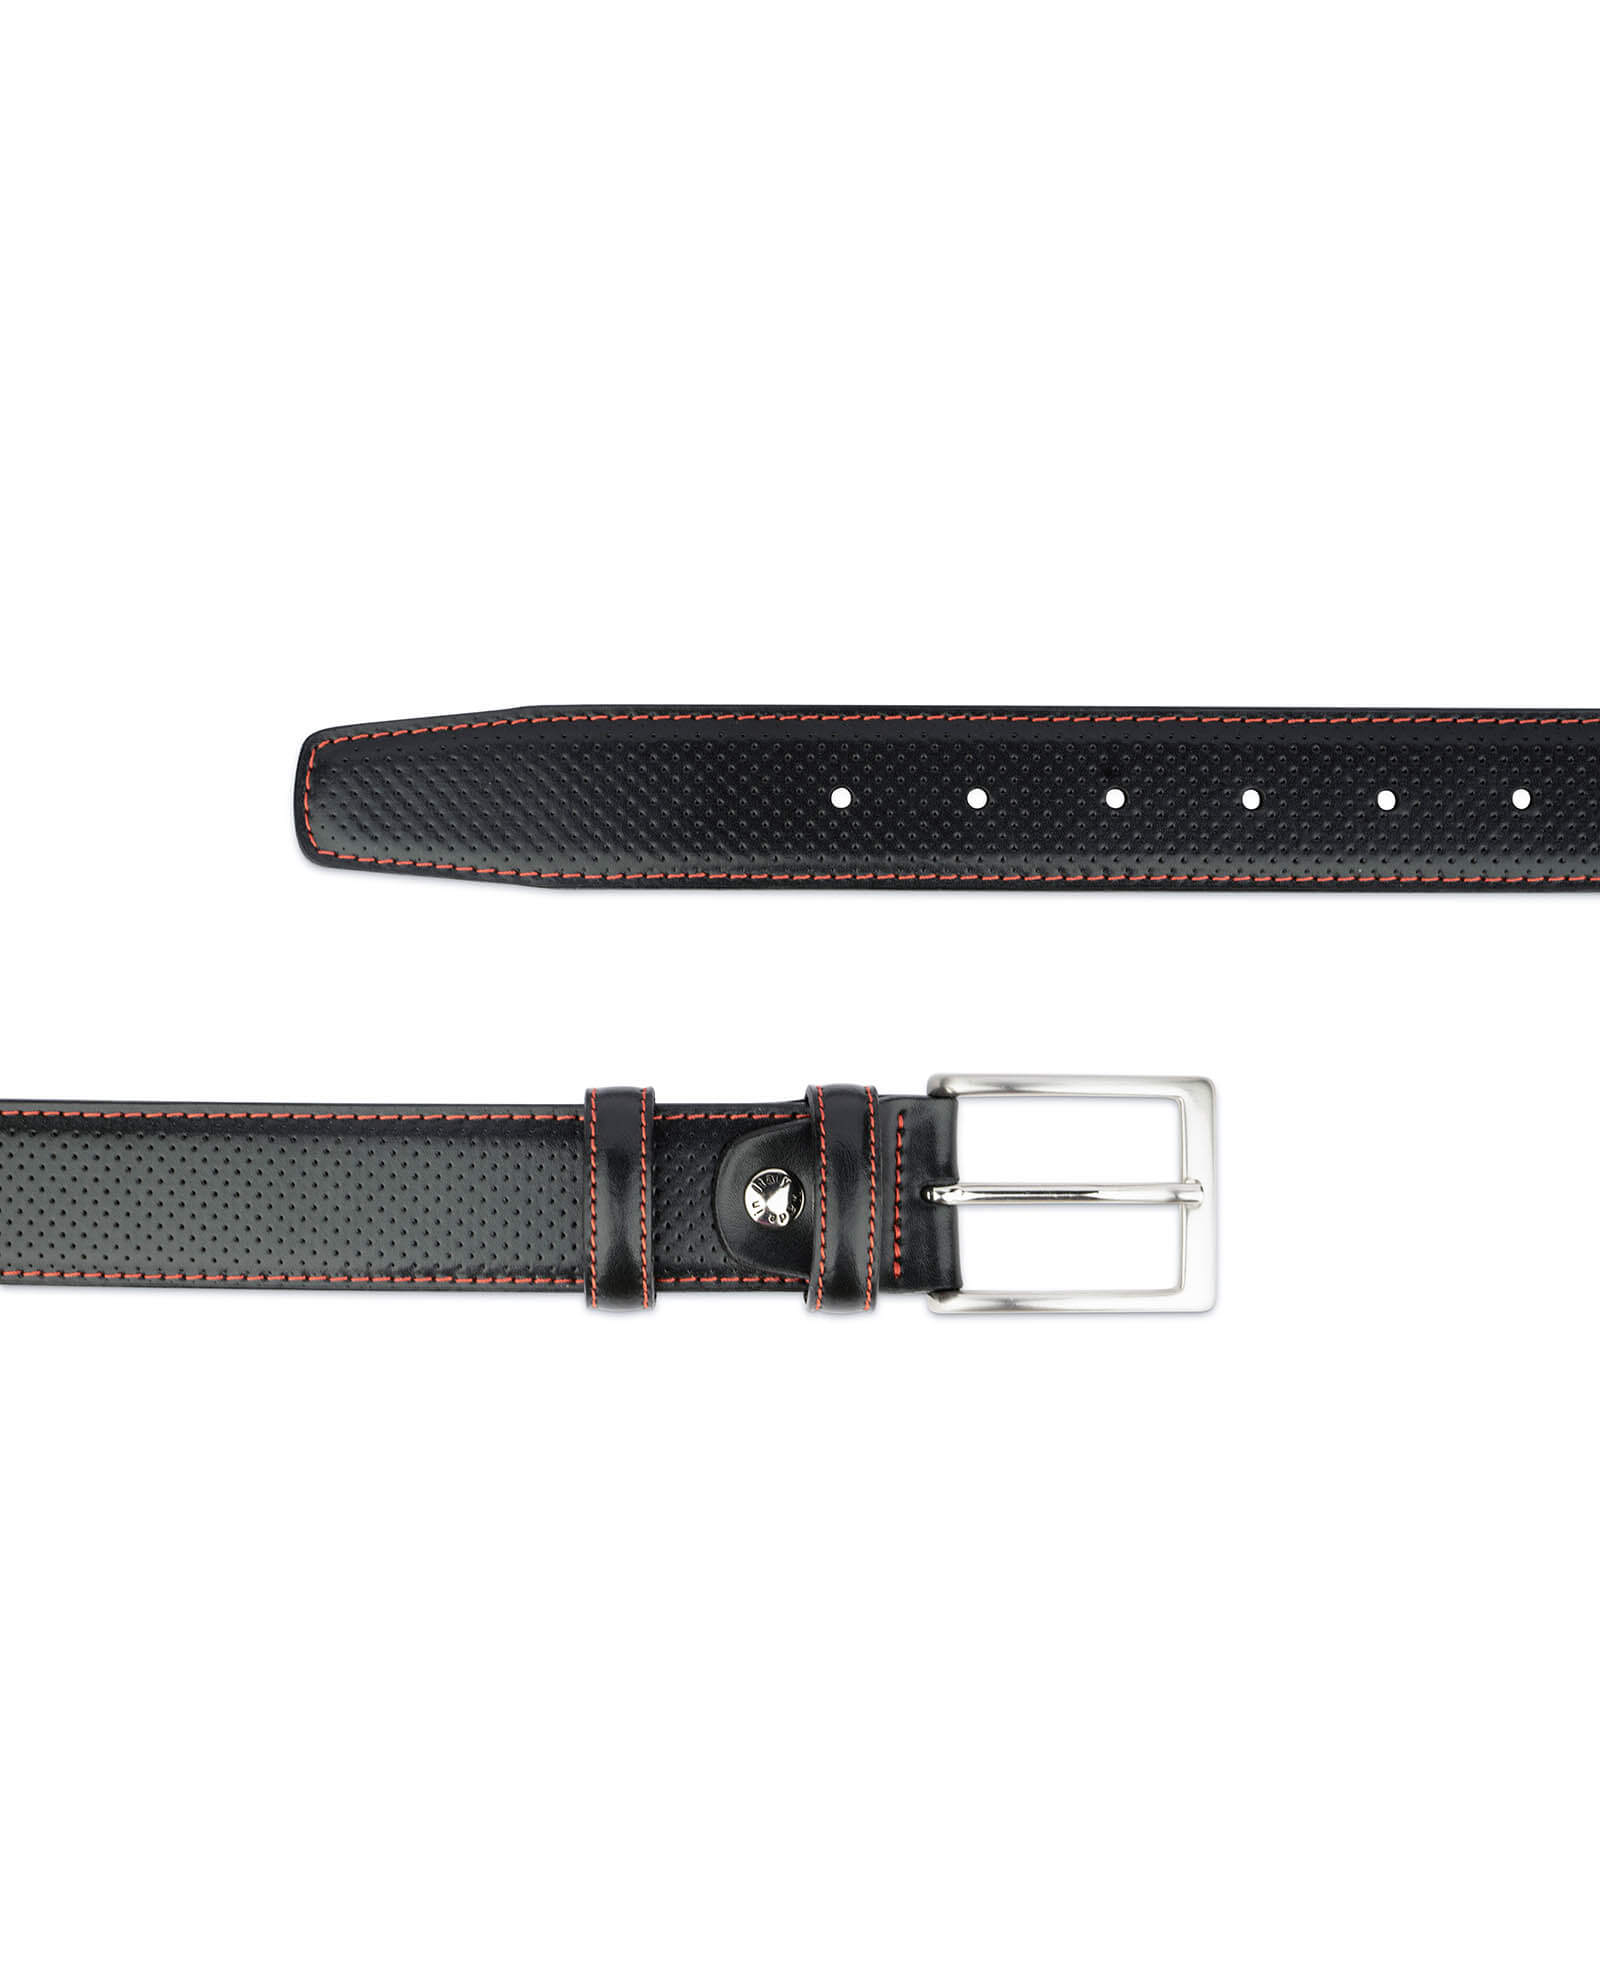 Buy Black Leather Belt for Men - Perforated & Red Stitch - Free Shipping